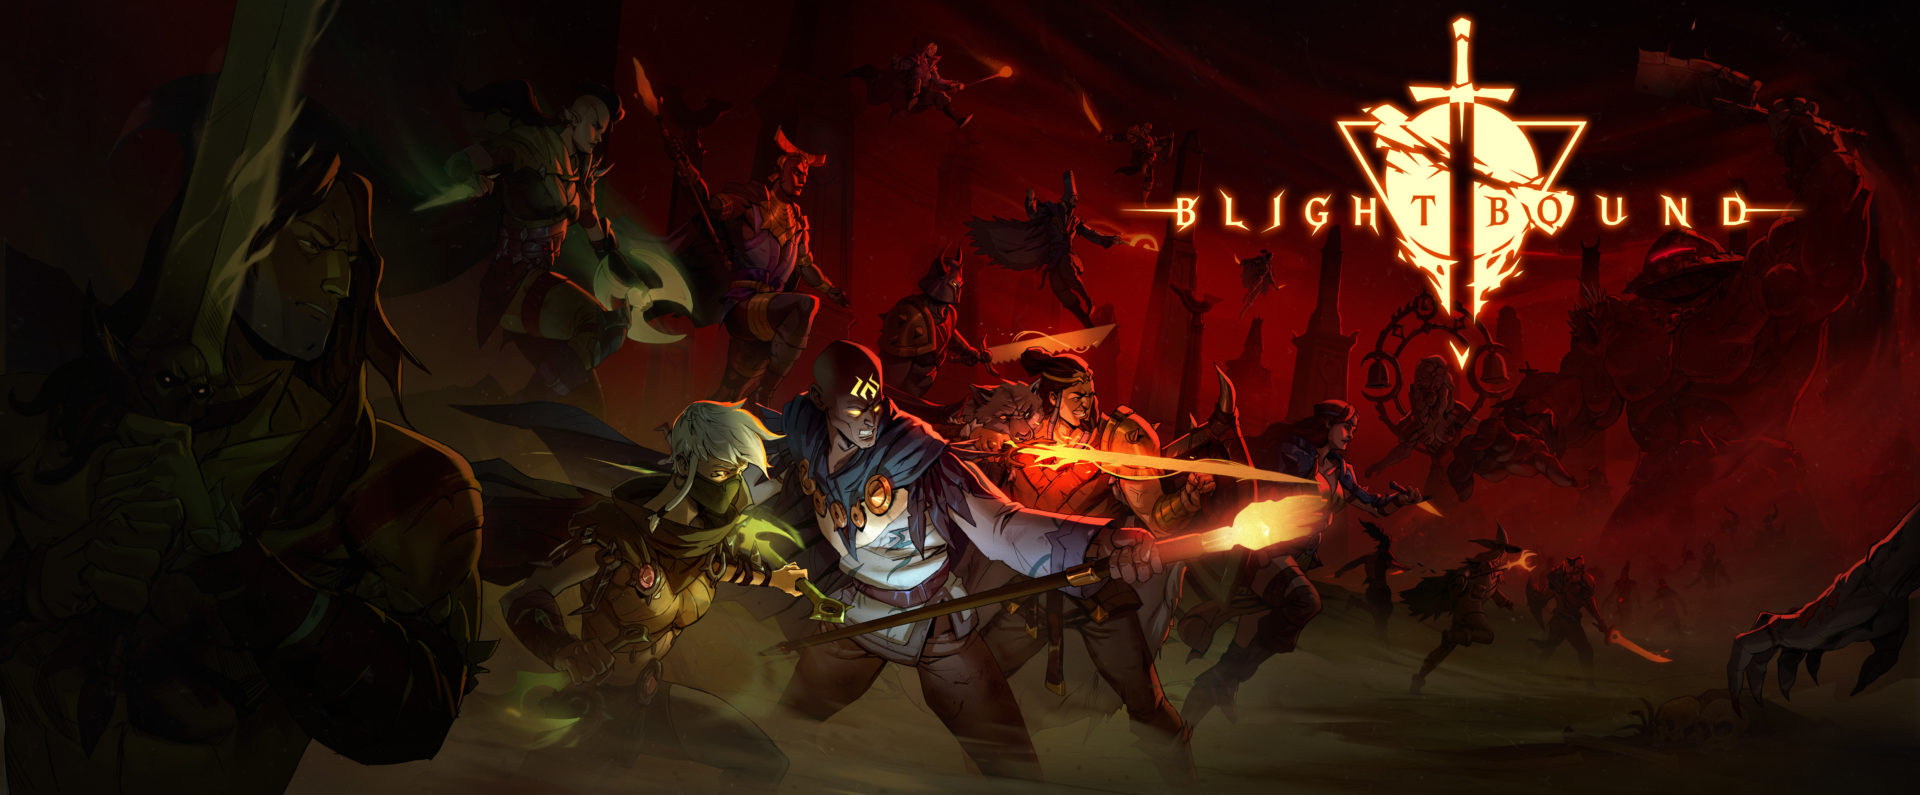 Blightbound Coming to Steam Early Access